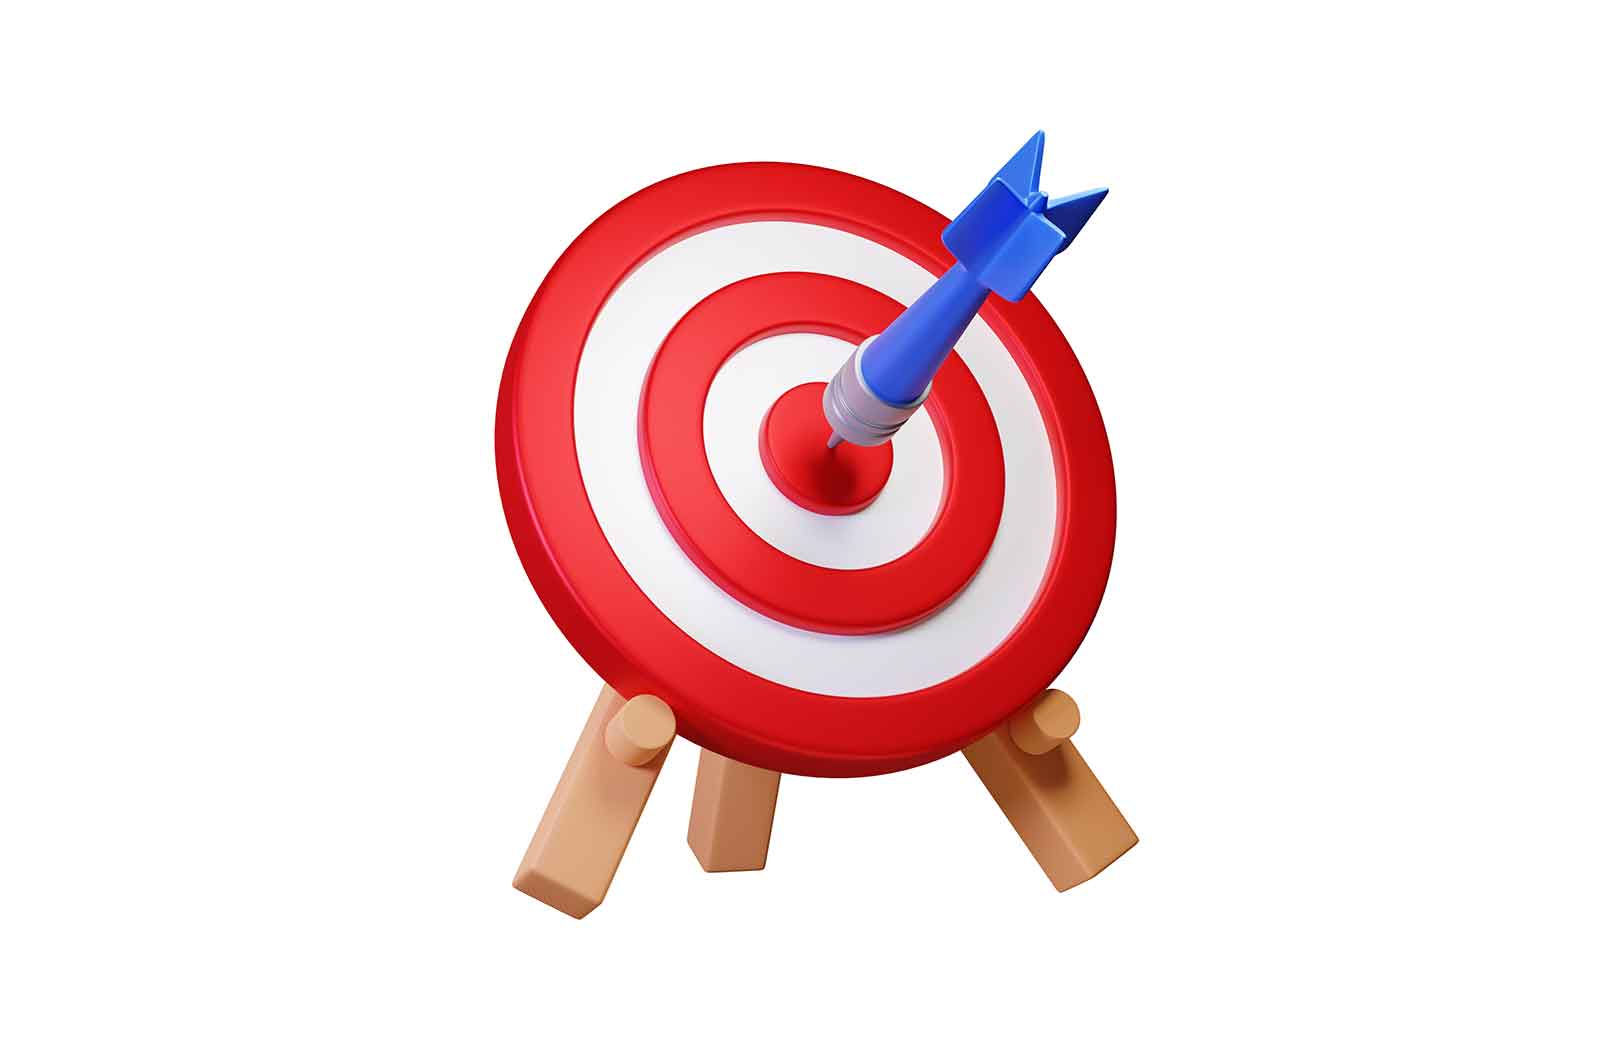 Target and arrow icon, goal achievement 3D rendered illustration. Red round dart board with arrow flying to bullseye.